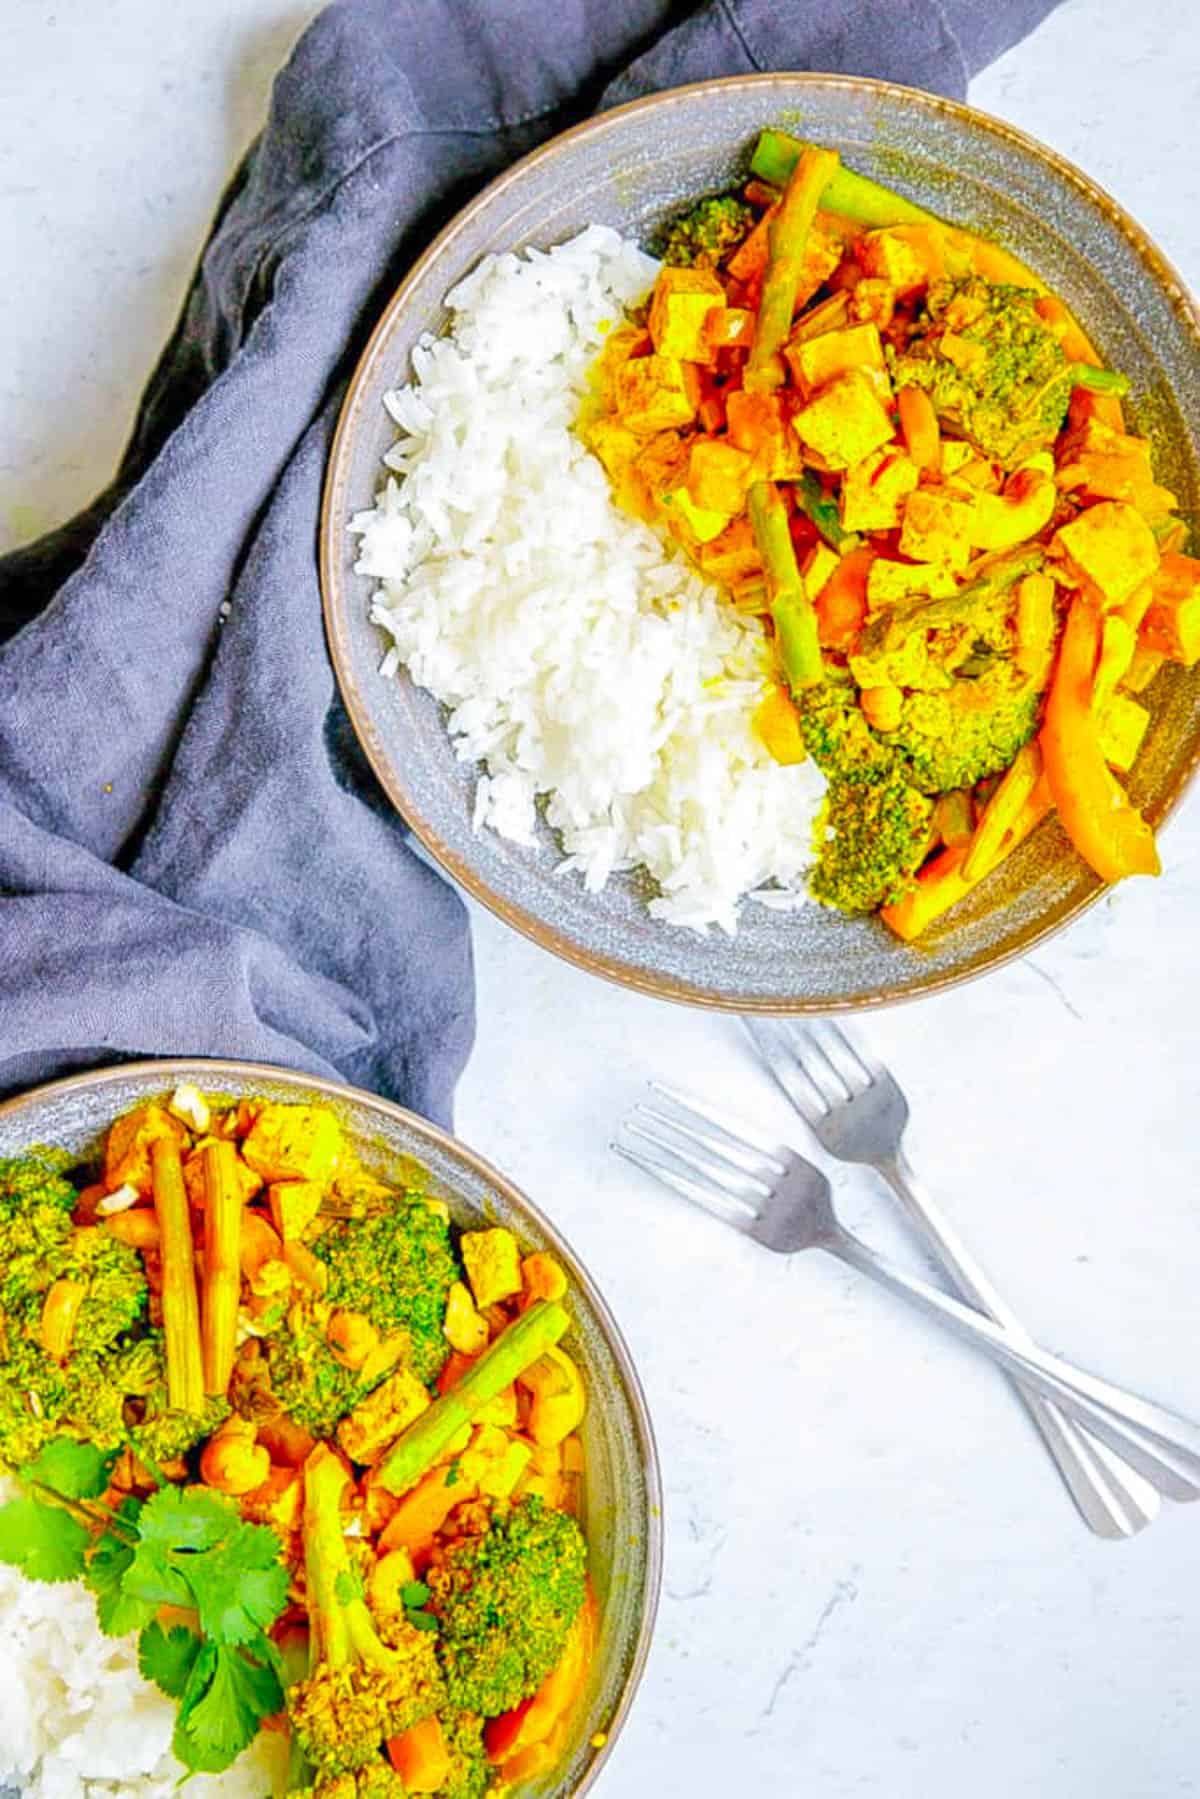 Tofu Thai yellow curry with broccoli, ،atoes, asparagus and peppers served in a grey bowl.